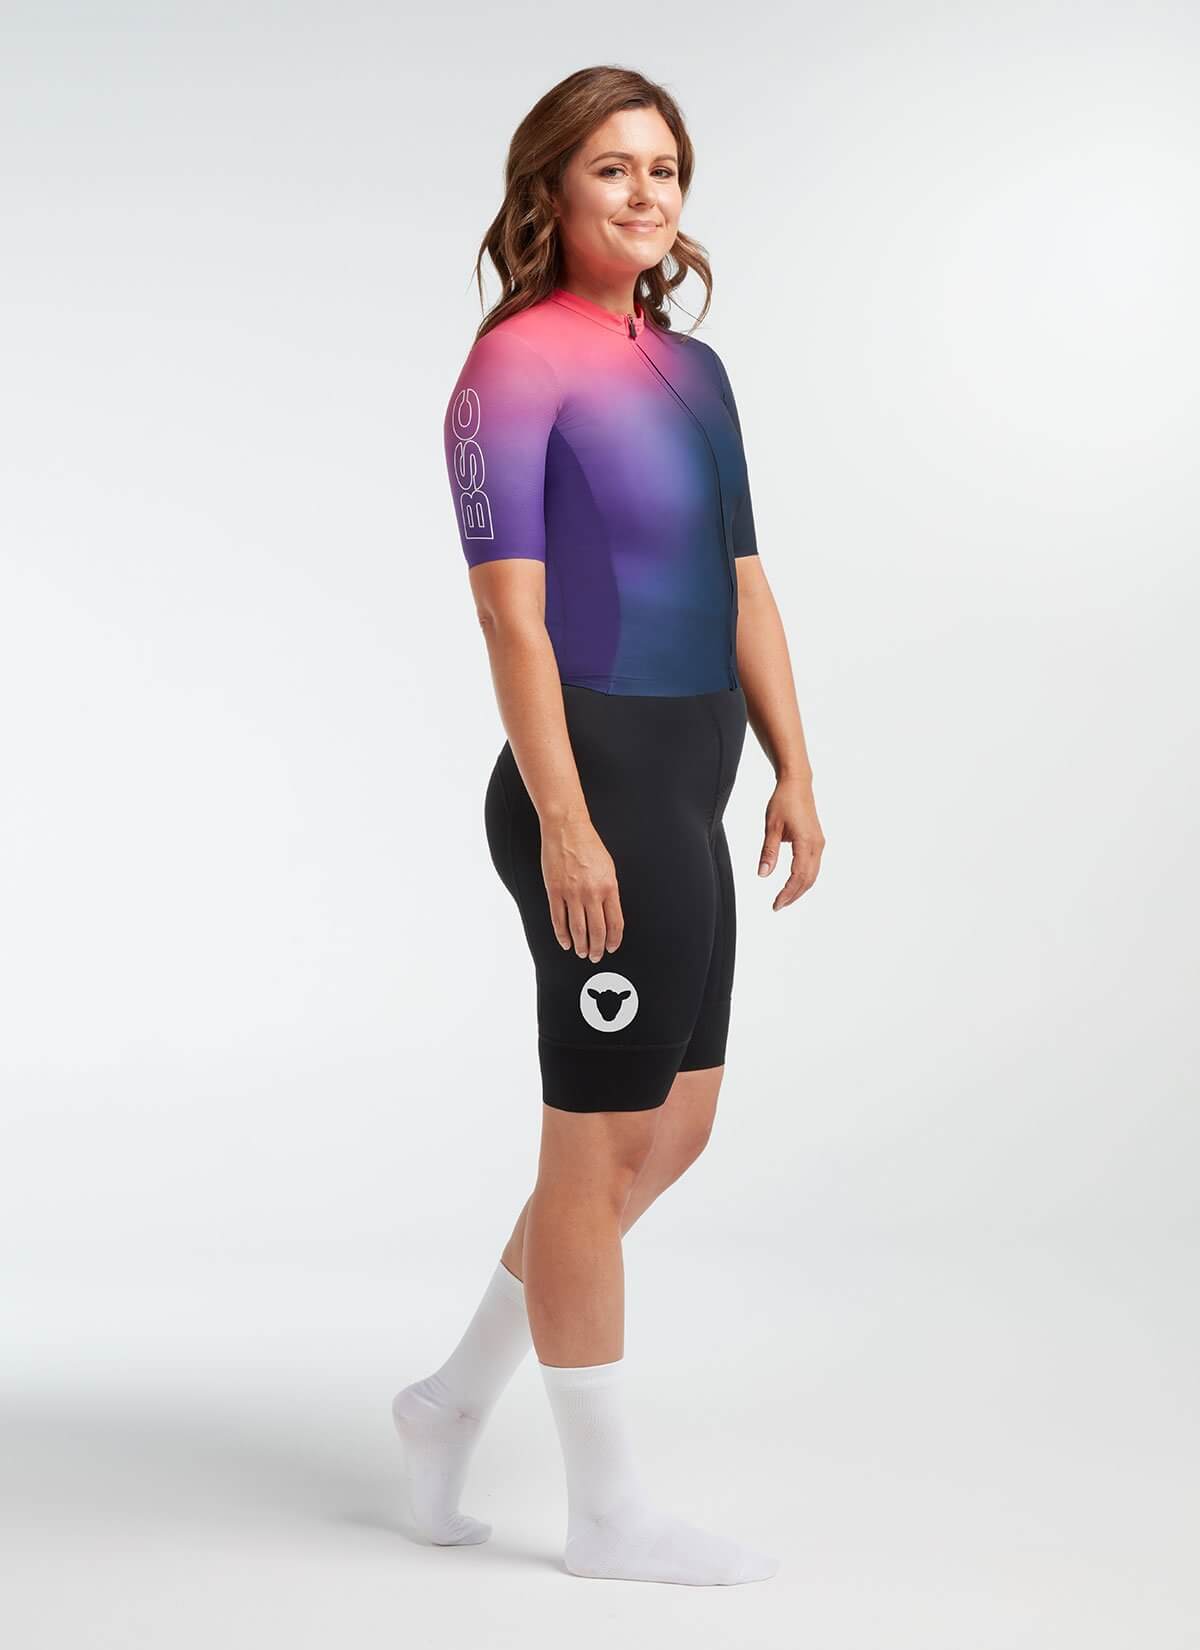 Black Sheep Cycling WMN Climber's Jersey Lakers Ombre ウィメンズサイクルジャージ | CYCLISM